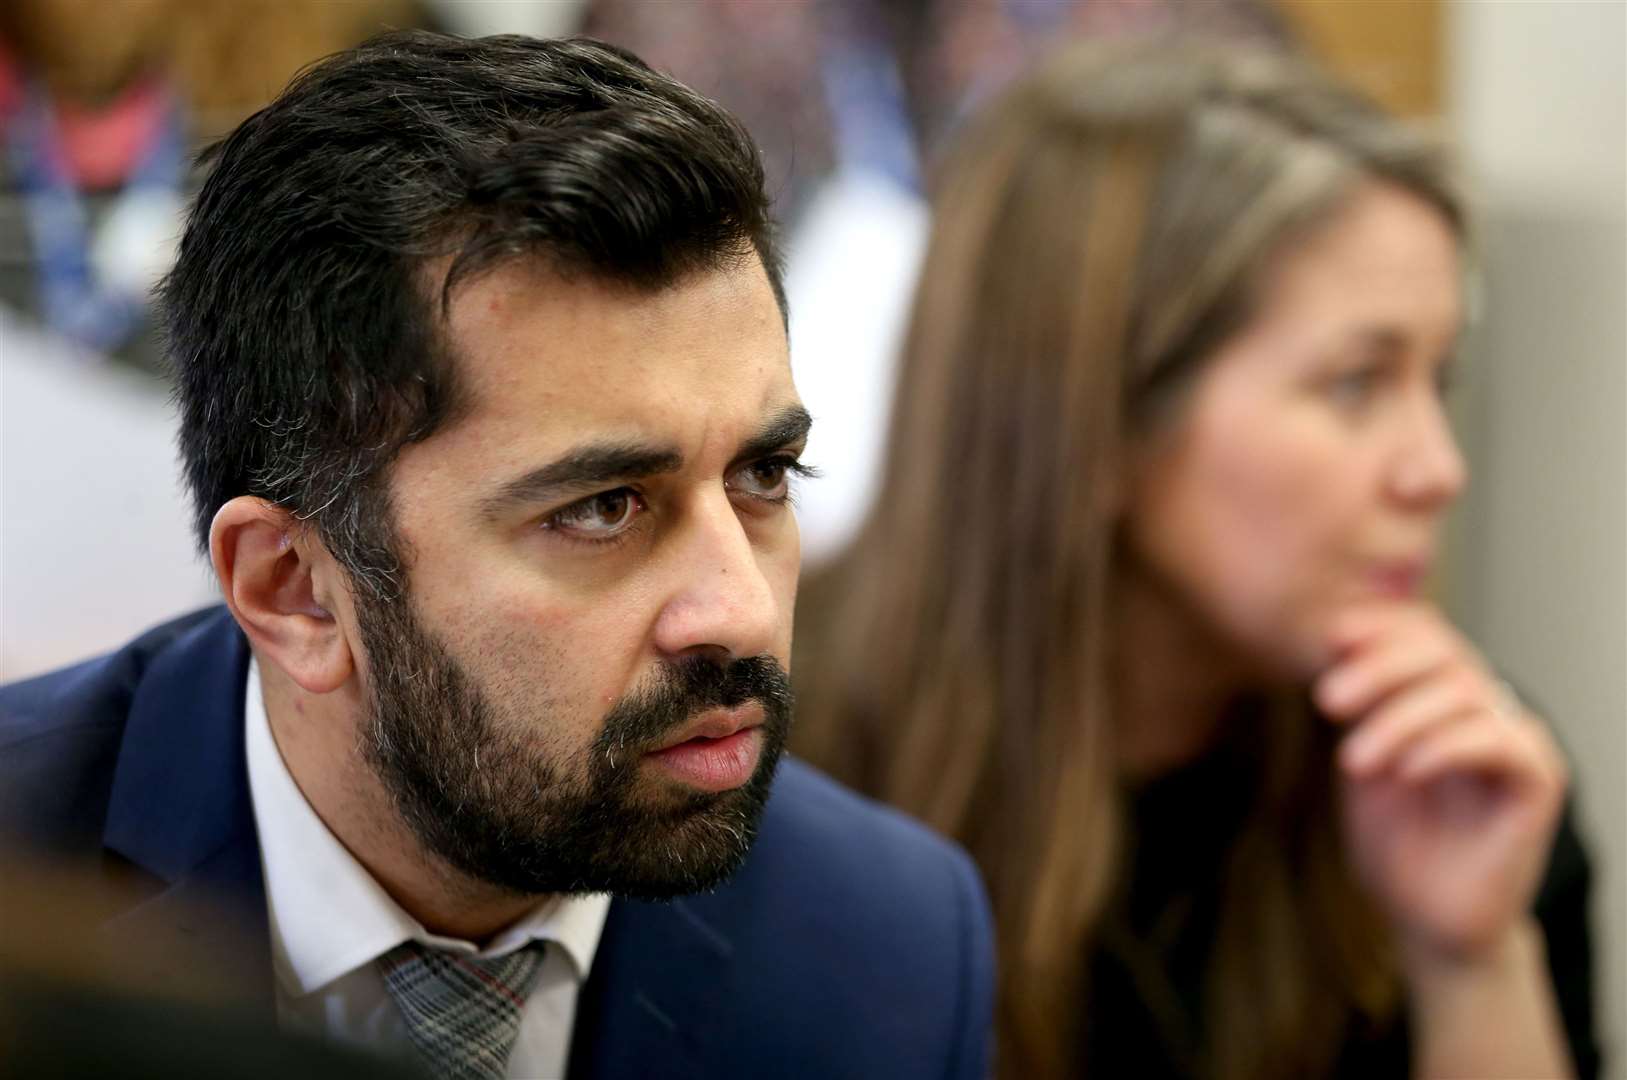 SNP Justice Secretary Humza Yousaf confirmed the change for travellers arriving into Scotland from Spain (Jane Barlow/PA)